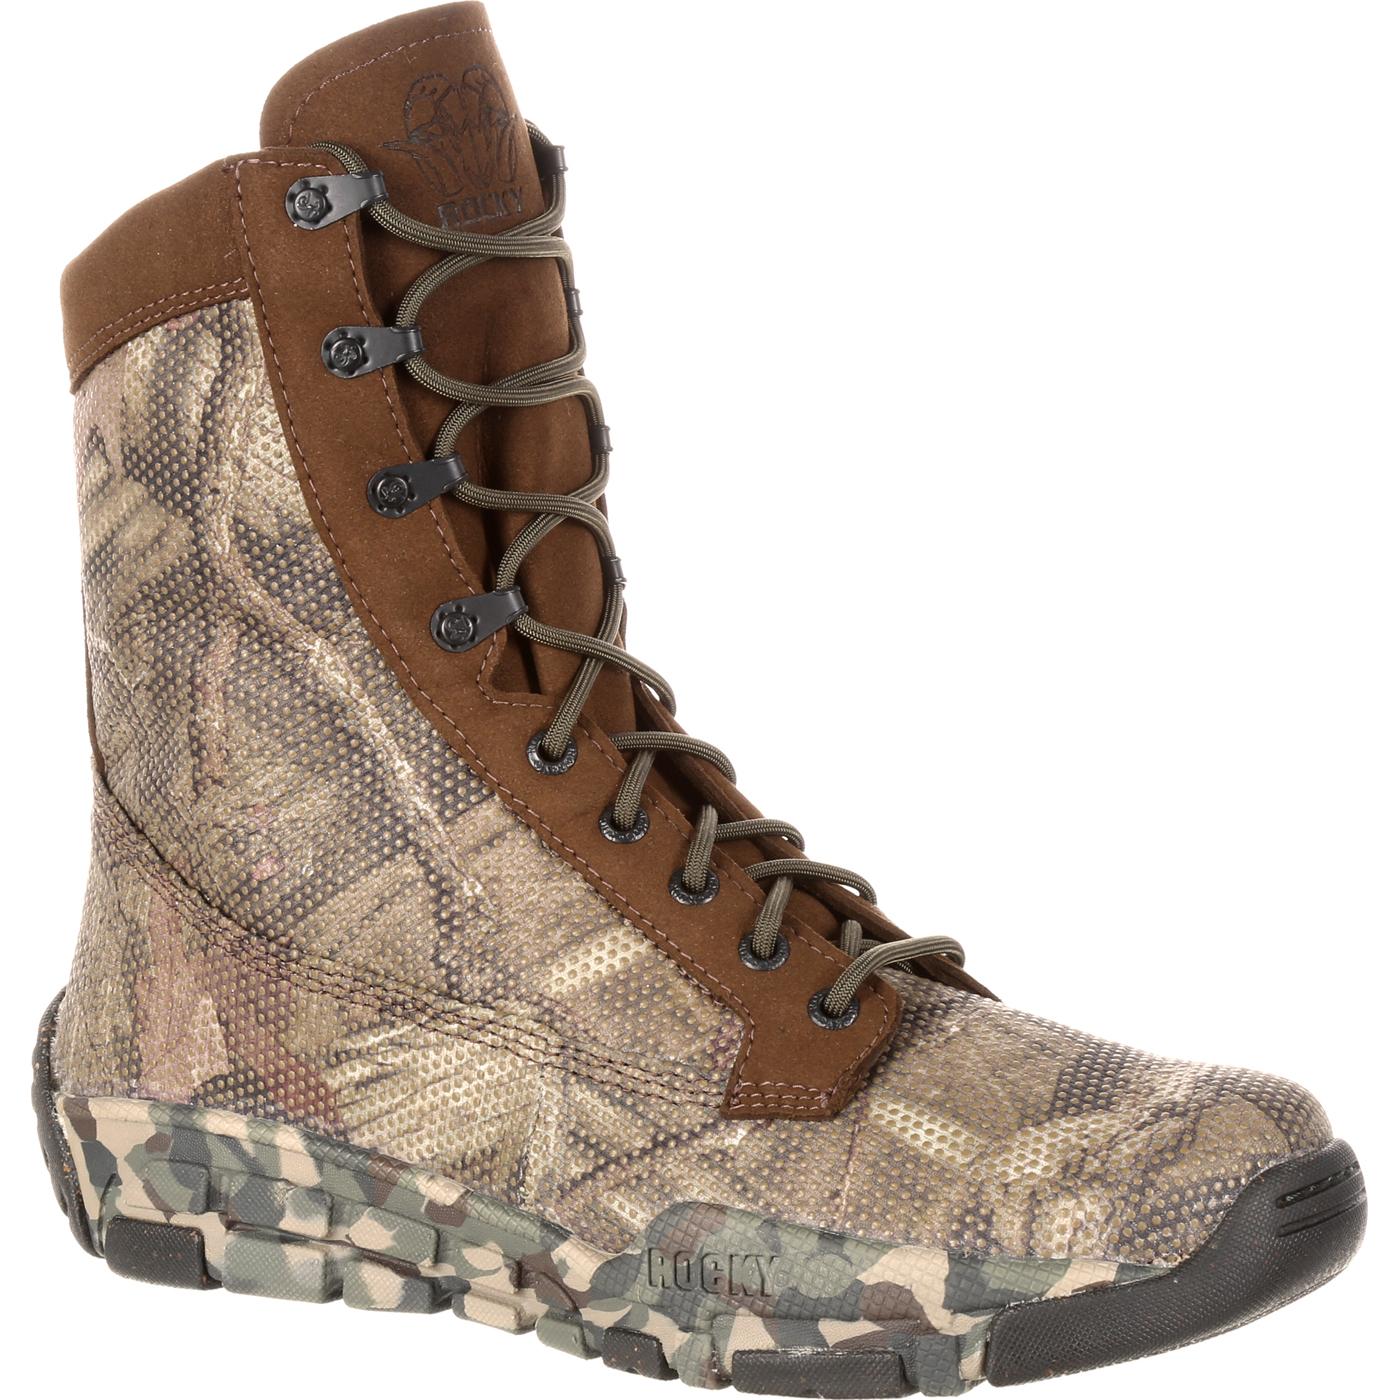 Rocky Boot: Men's Camouflage Hunting Boot, style RKS0155IA